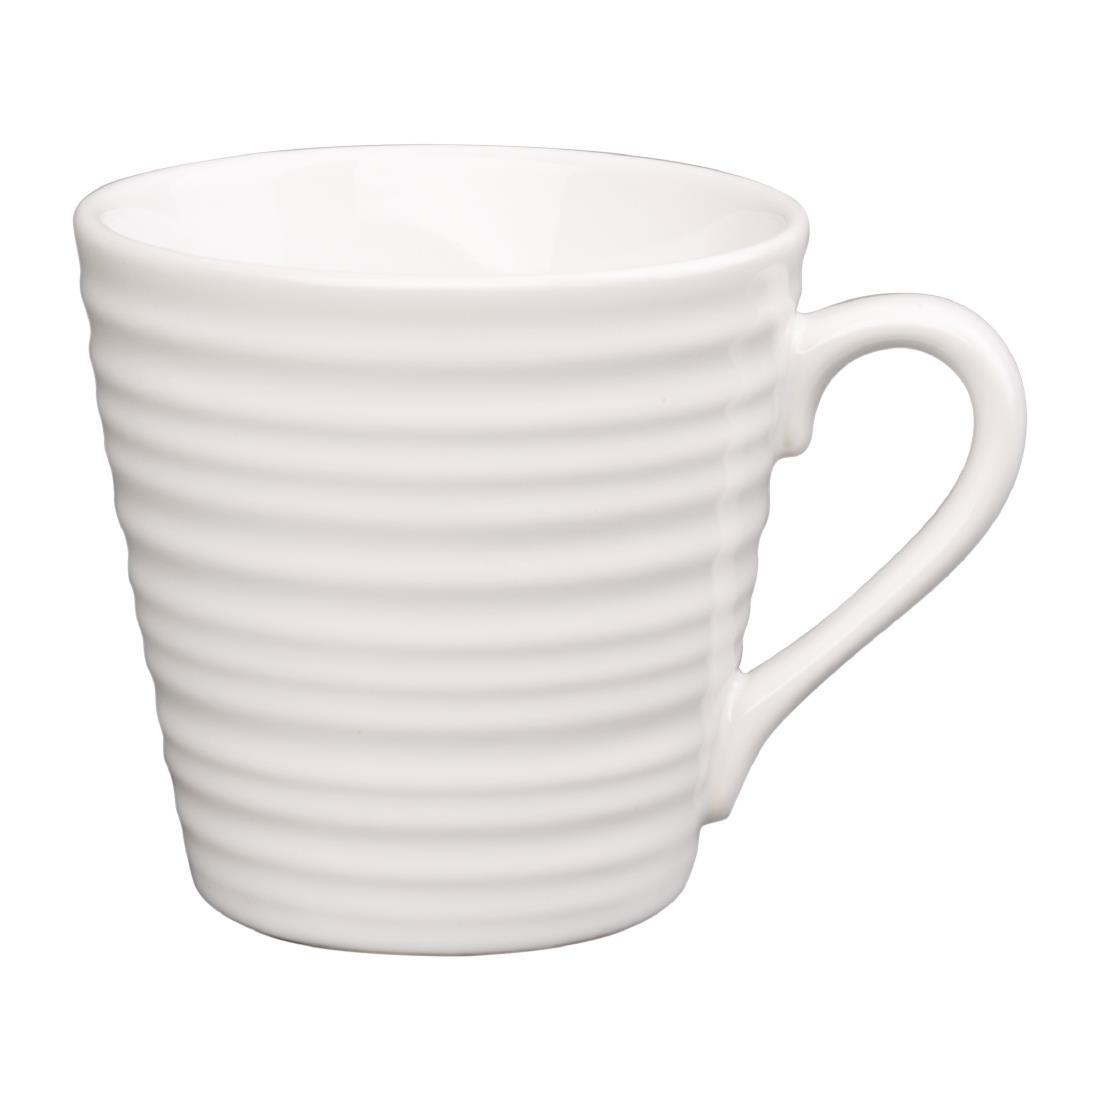 Olympia Café Aroma Mugs White 340ml (Pack of 6) - DH633  - 2